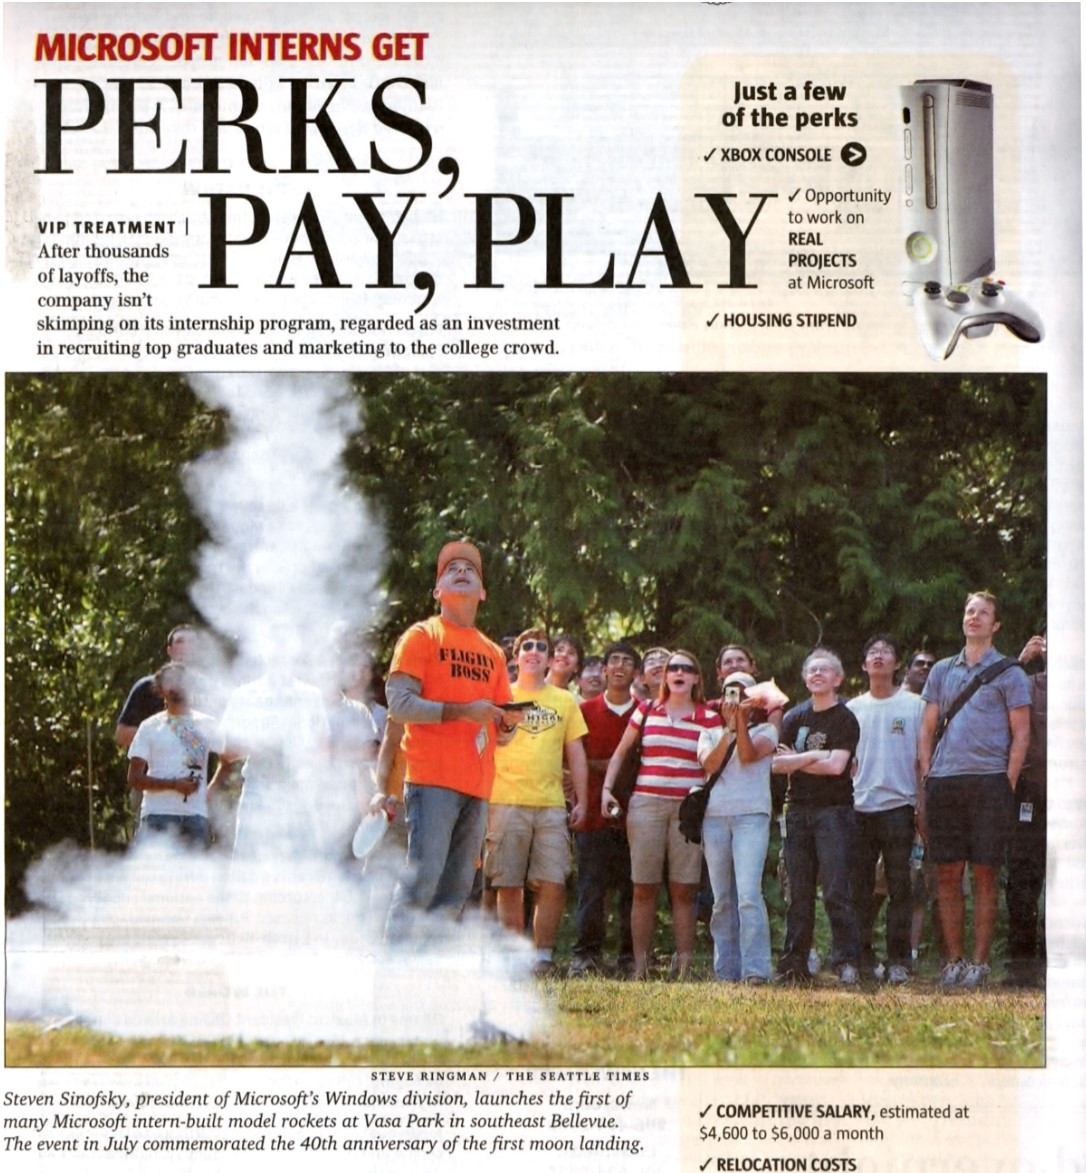 Newspaper article showing "Perks, Pay, Play" and a group of micrsoft interns launching model rockets. I am at the controls. It is summer and looks fun.